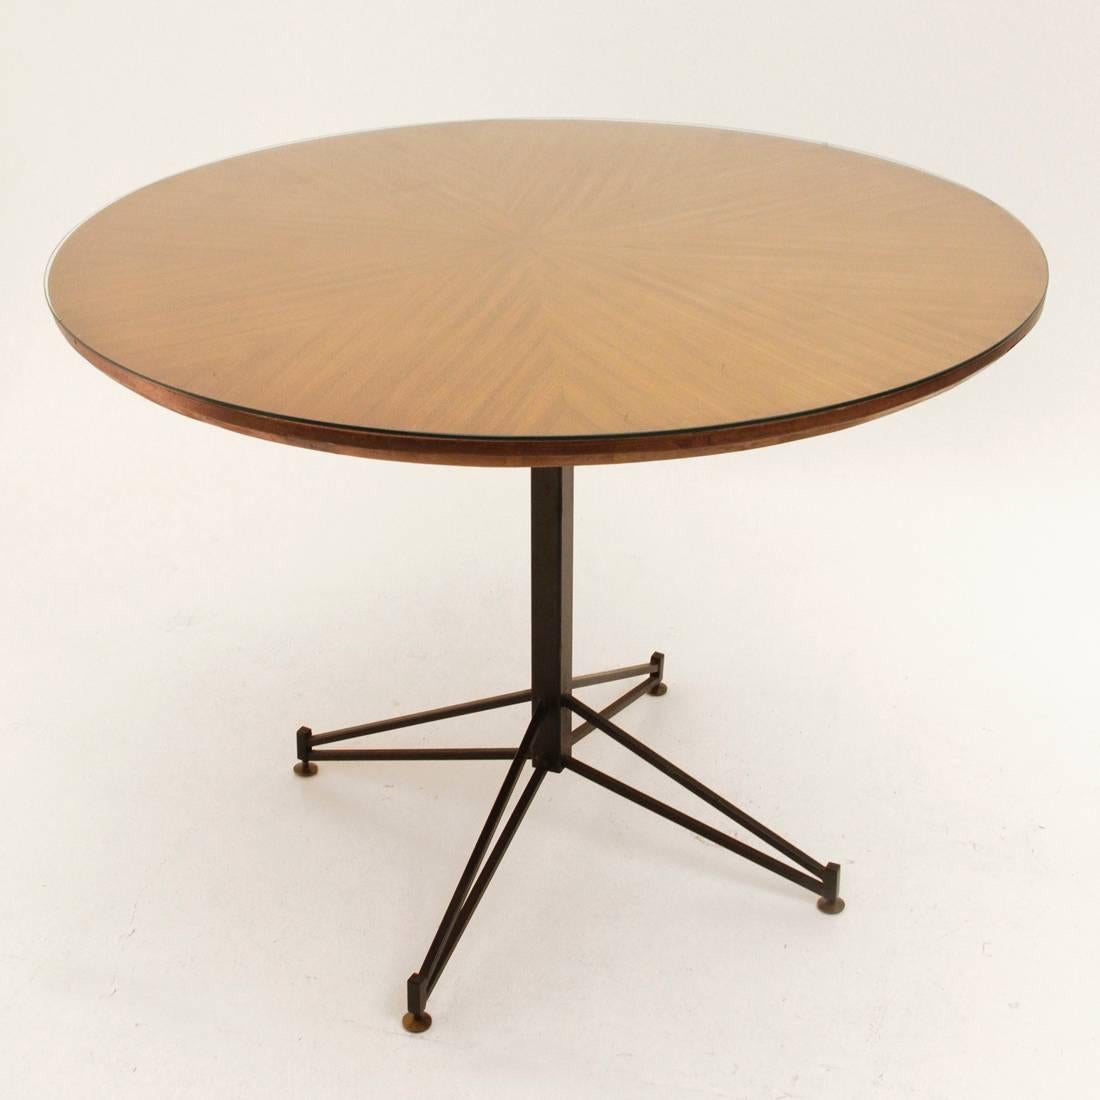 Italian table designed by Carlo Ratti and produced in the 1950s.
Structure in black lacquered metal, adjustable brass feet.
Circular top in veneered wood, glass tabletop.